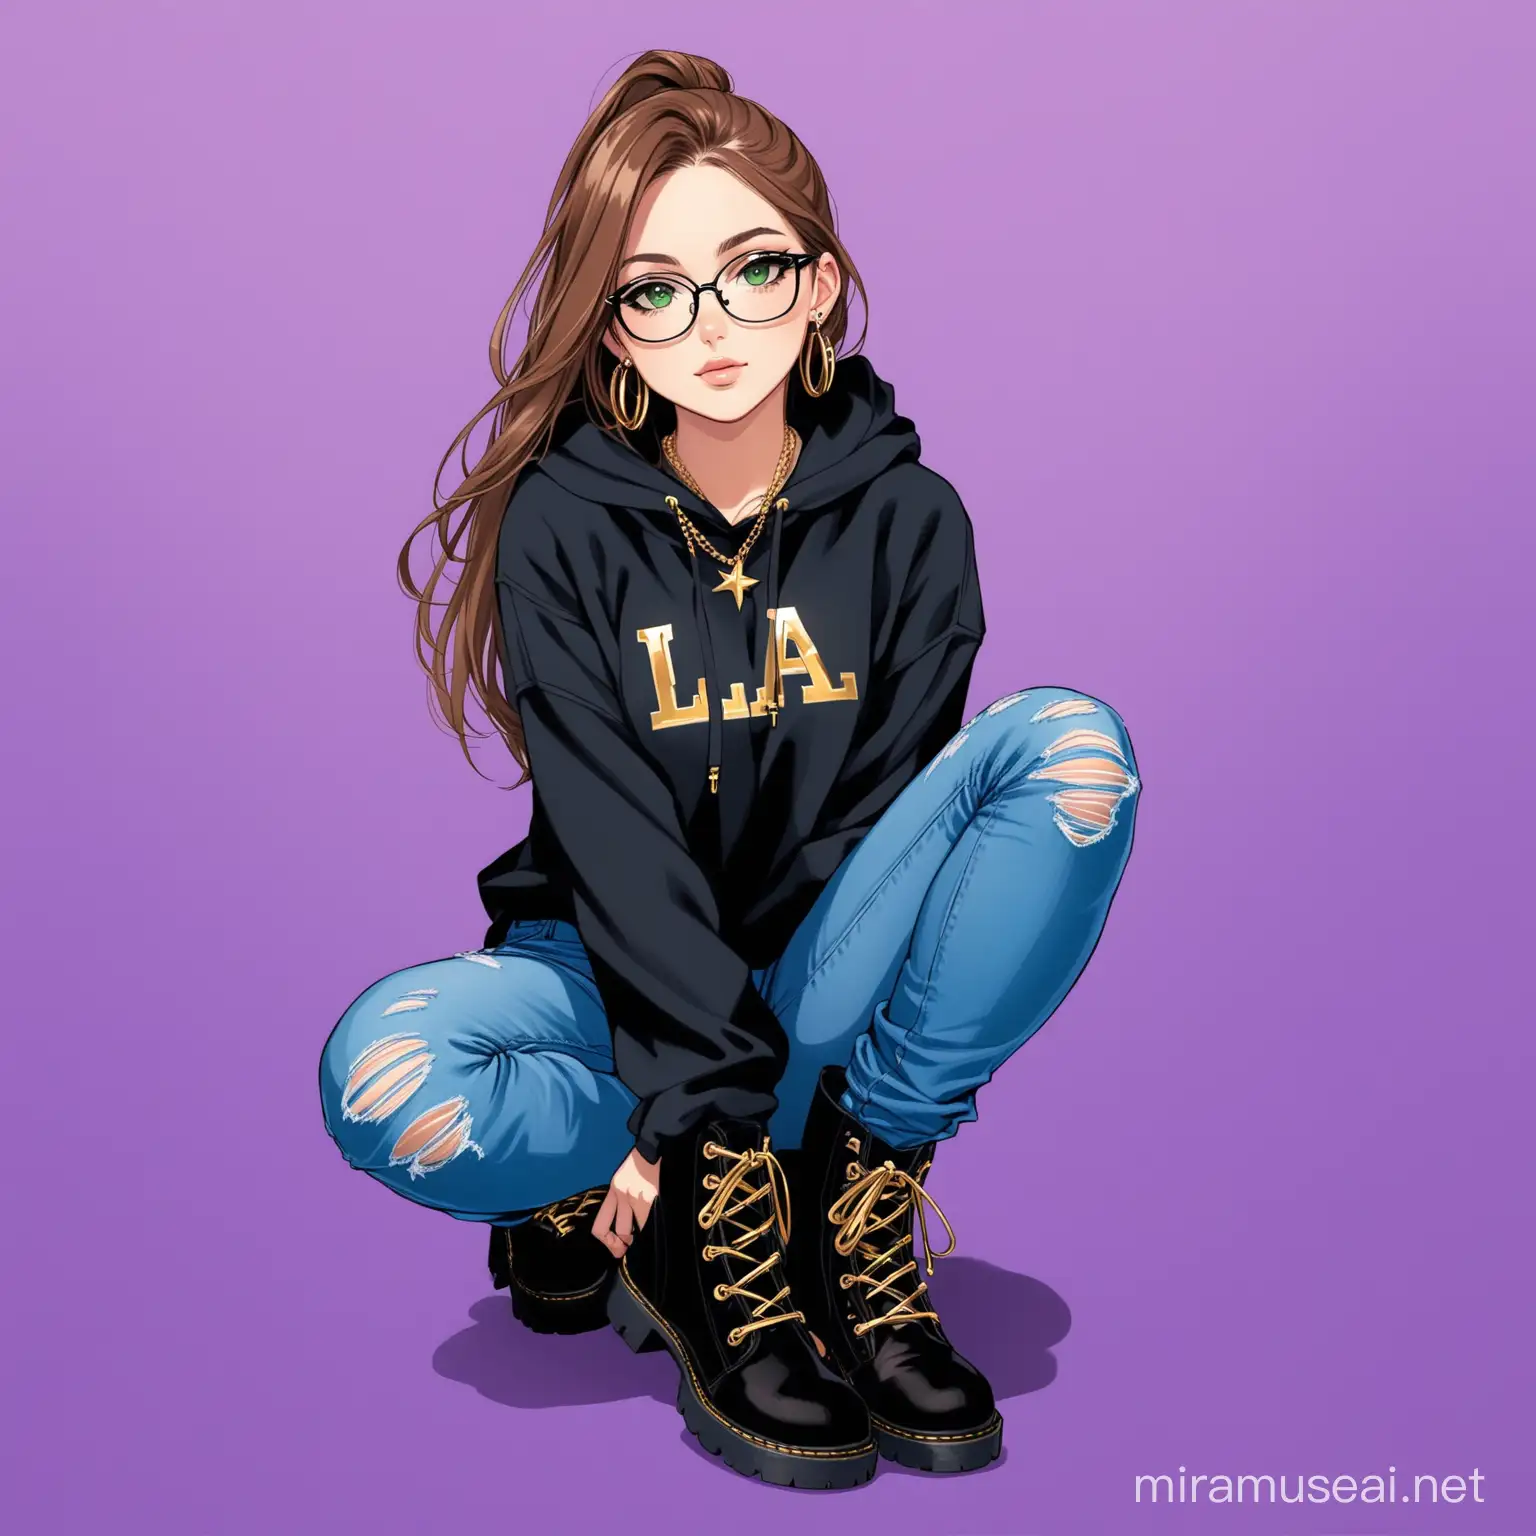 22 year old girl, long brown hair, green eyes, black glasses, blue L.A hoodie, flare jeans, gold earrings, gold necklace, black laced up boots, purple background,